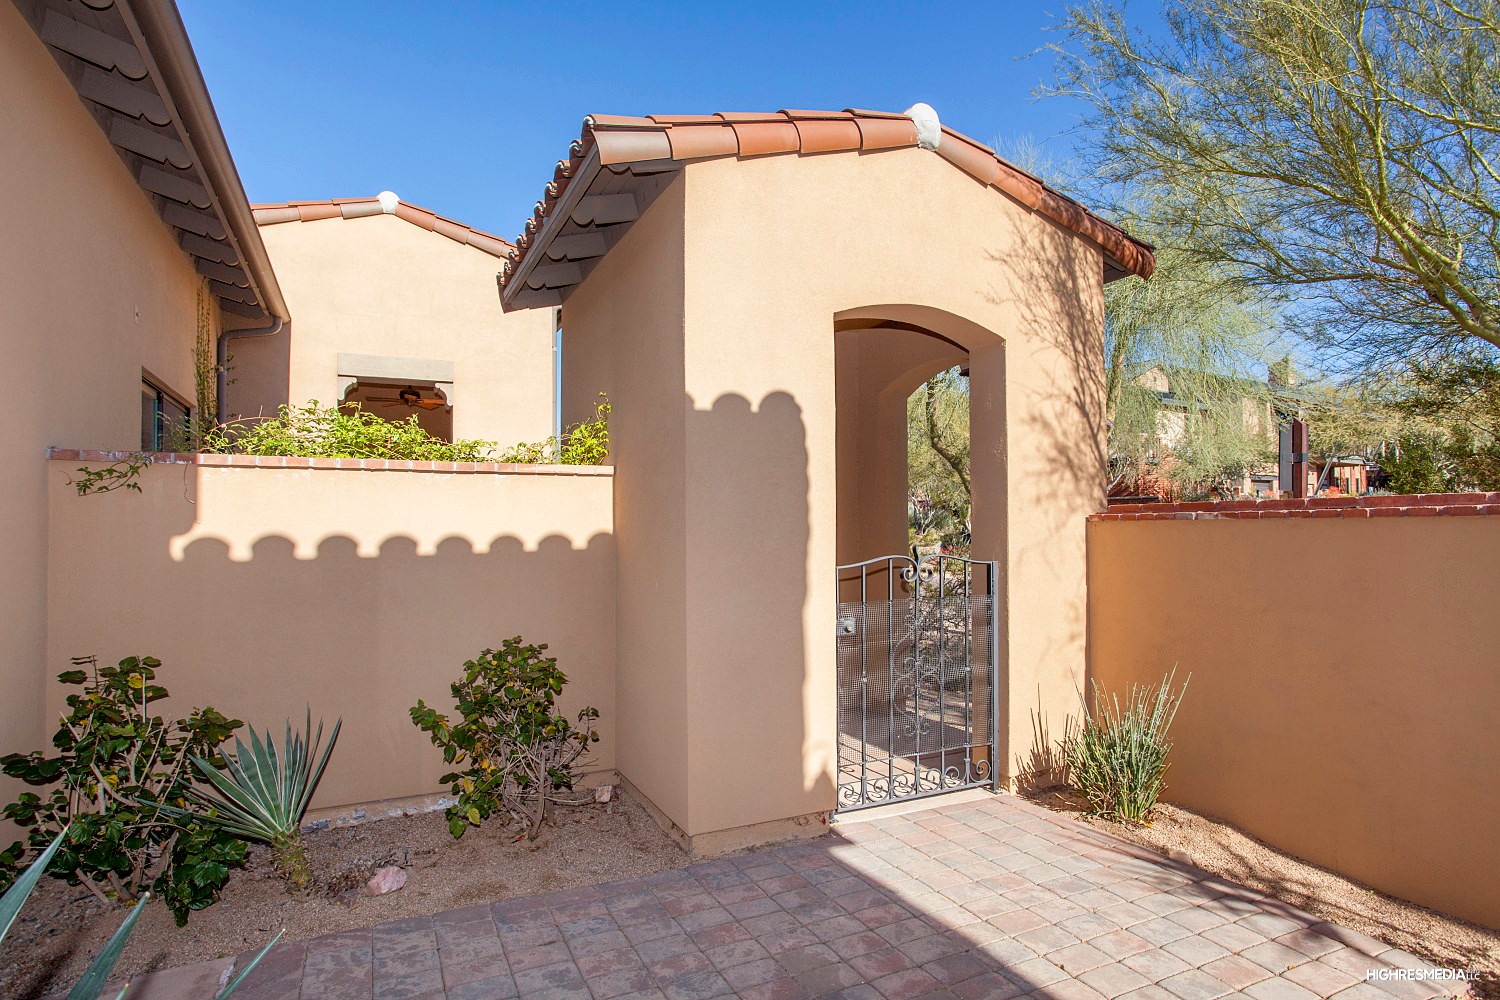 Gated entry to back patio at this Scottsdale townhome for sale in Market Street at DC Ranch located at 20704 N 90th Pl #1005 Scottsdale, AZ 85255 listed by Don Matheson at The Matheson Team